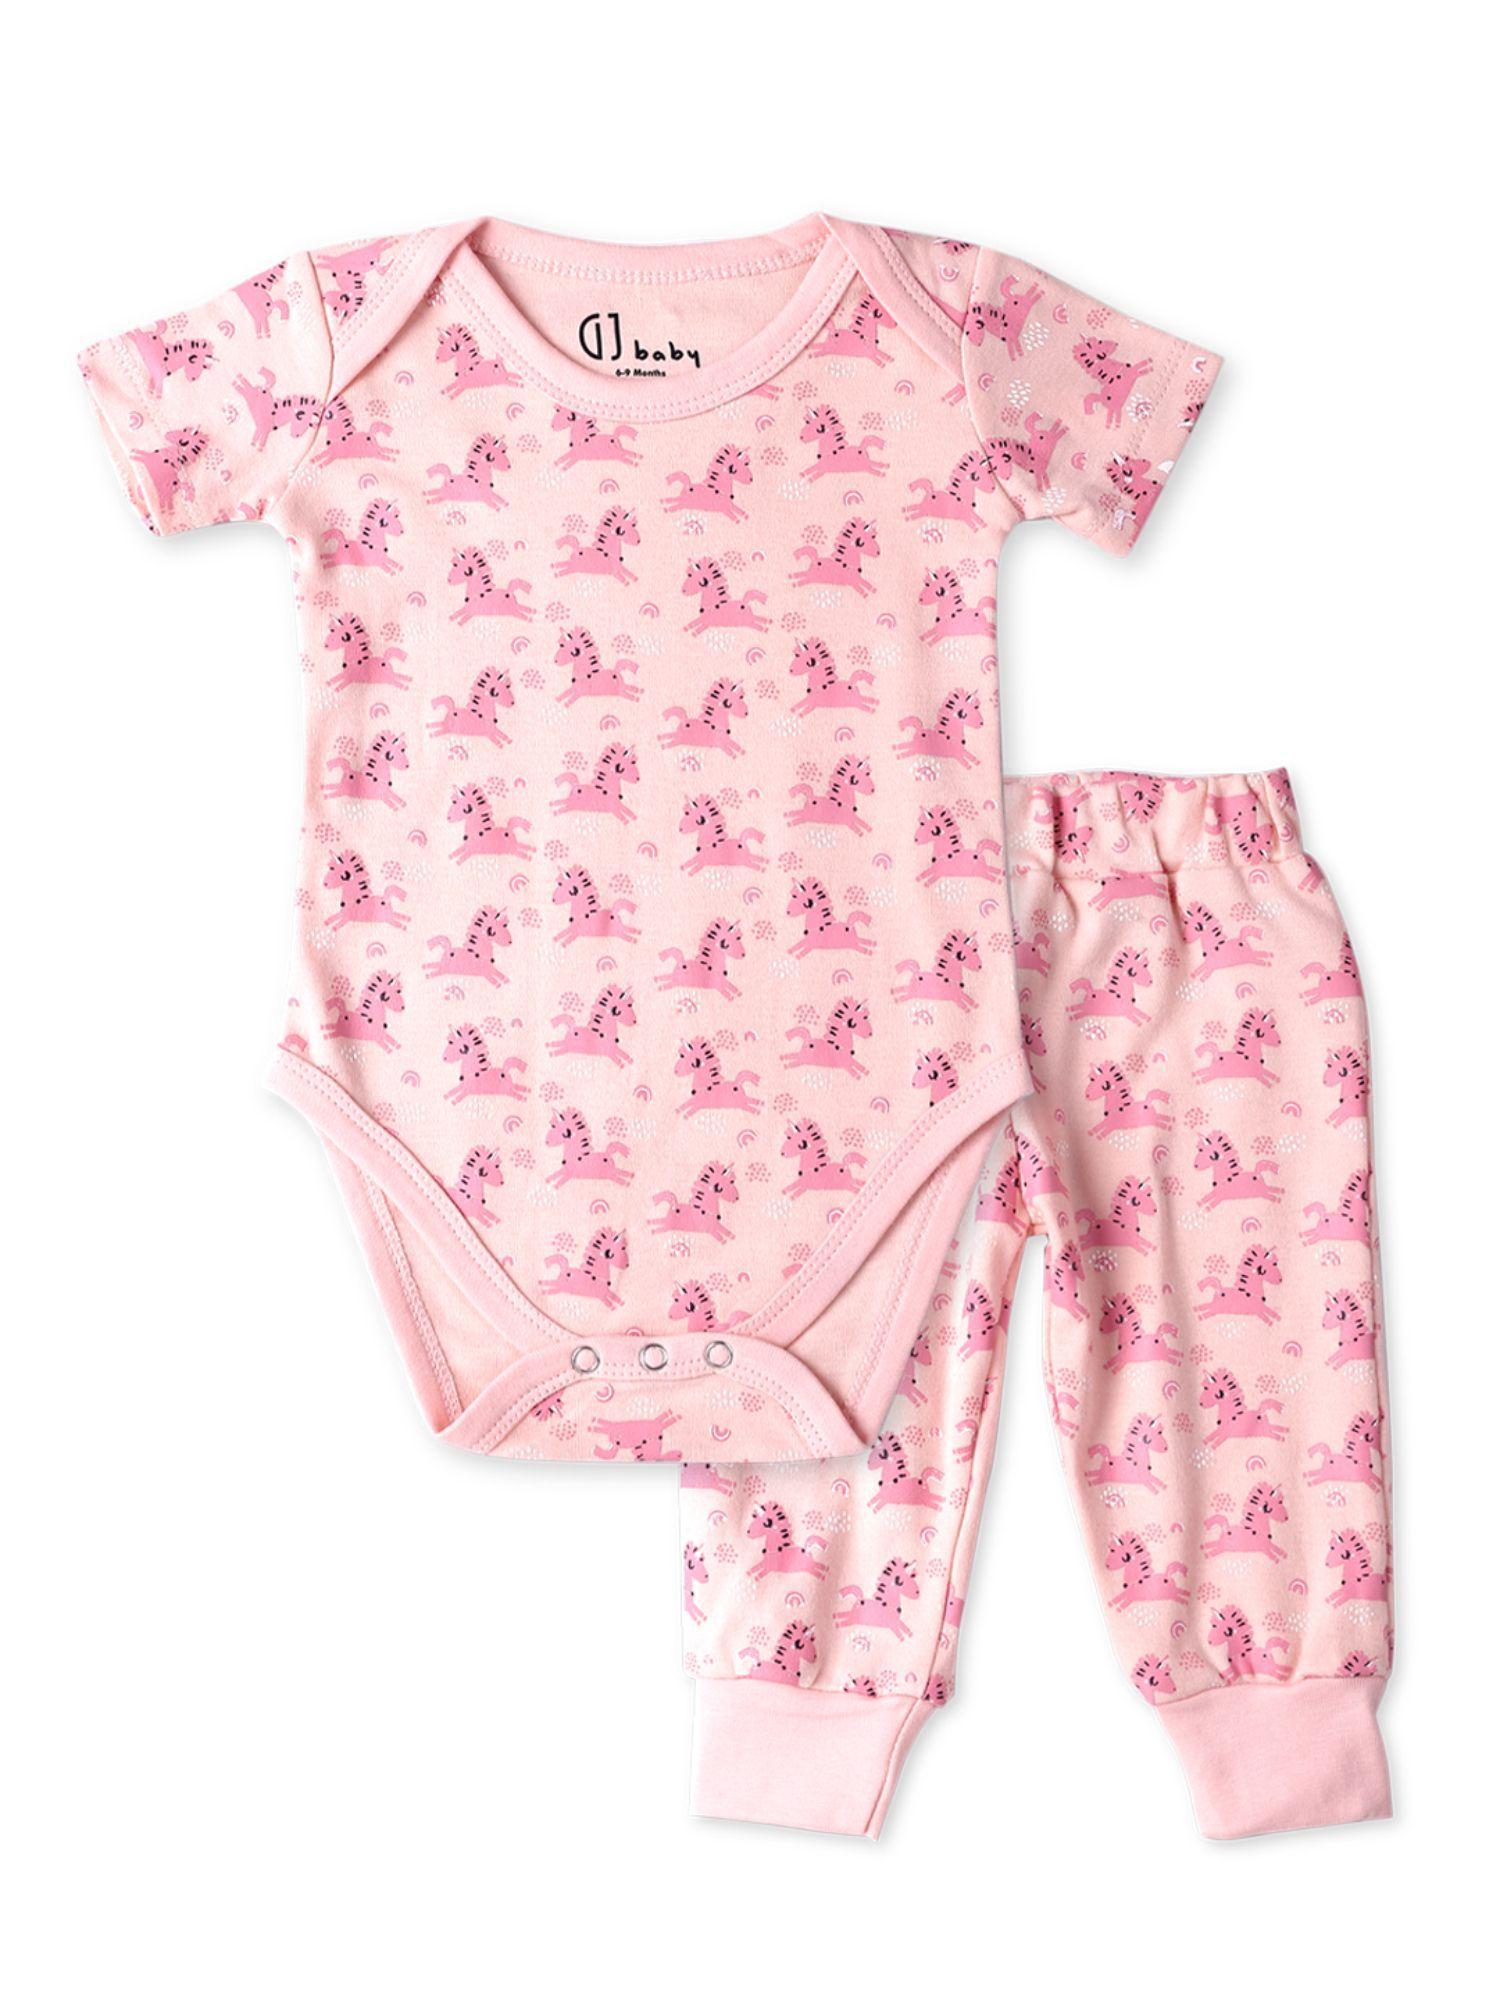 baby girls pink cotton printed onesies and bottoms (set of 2)